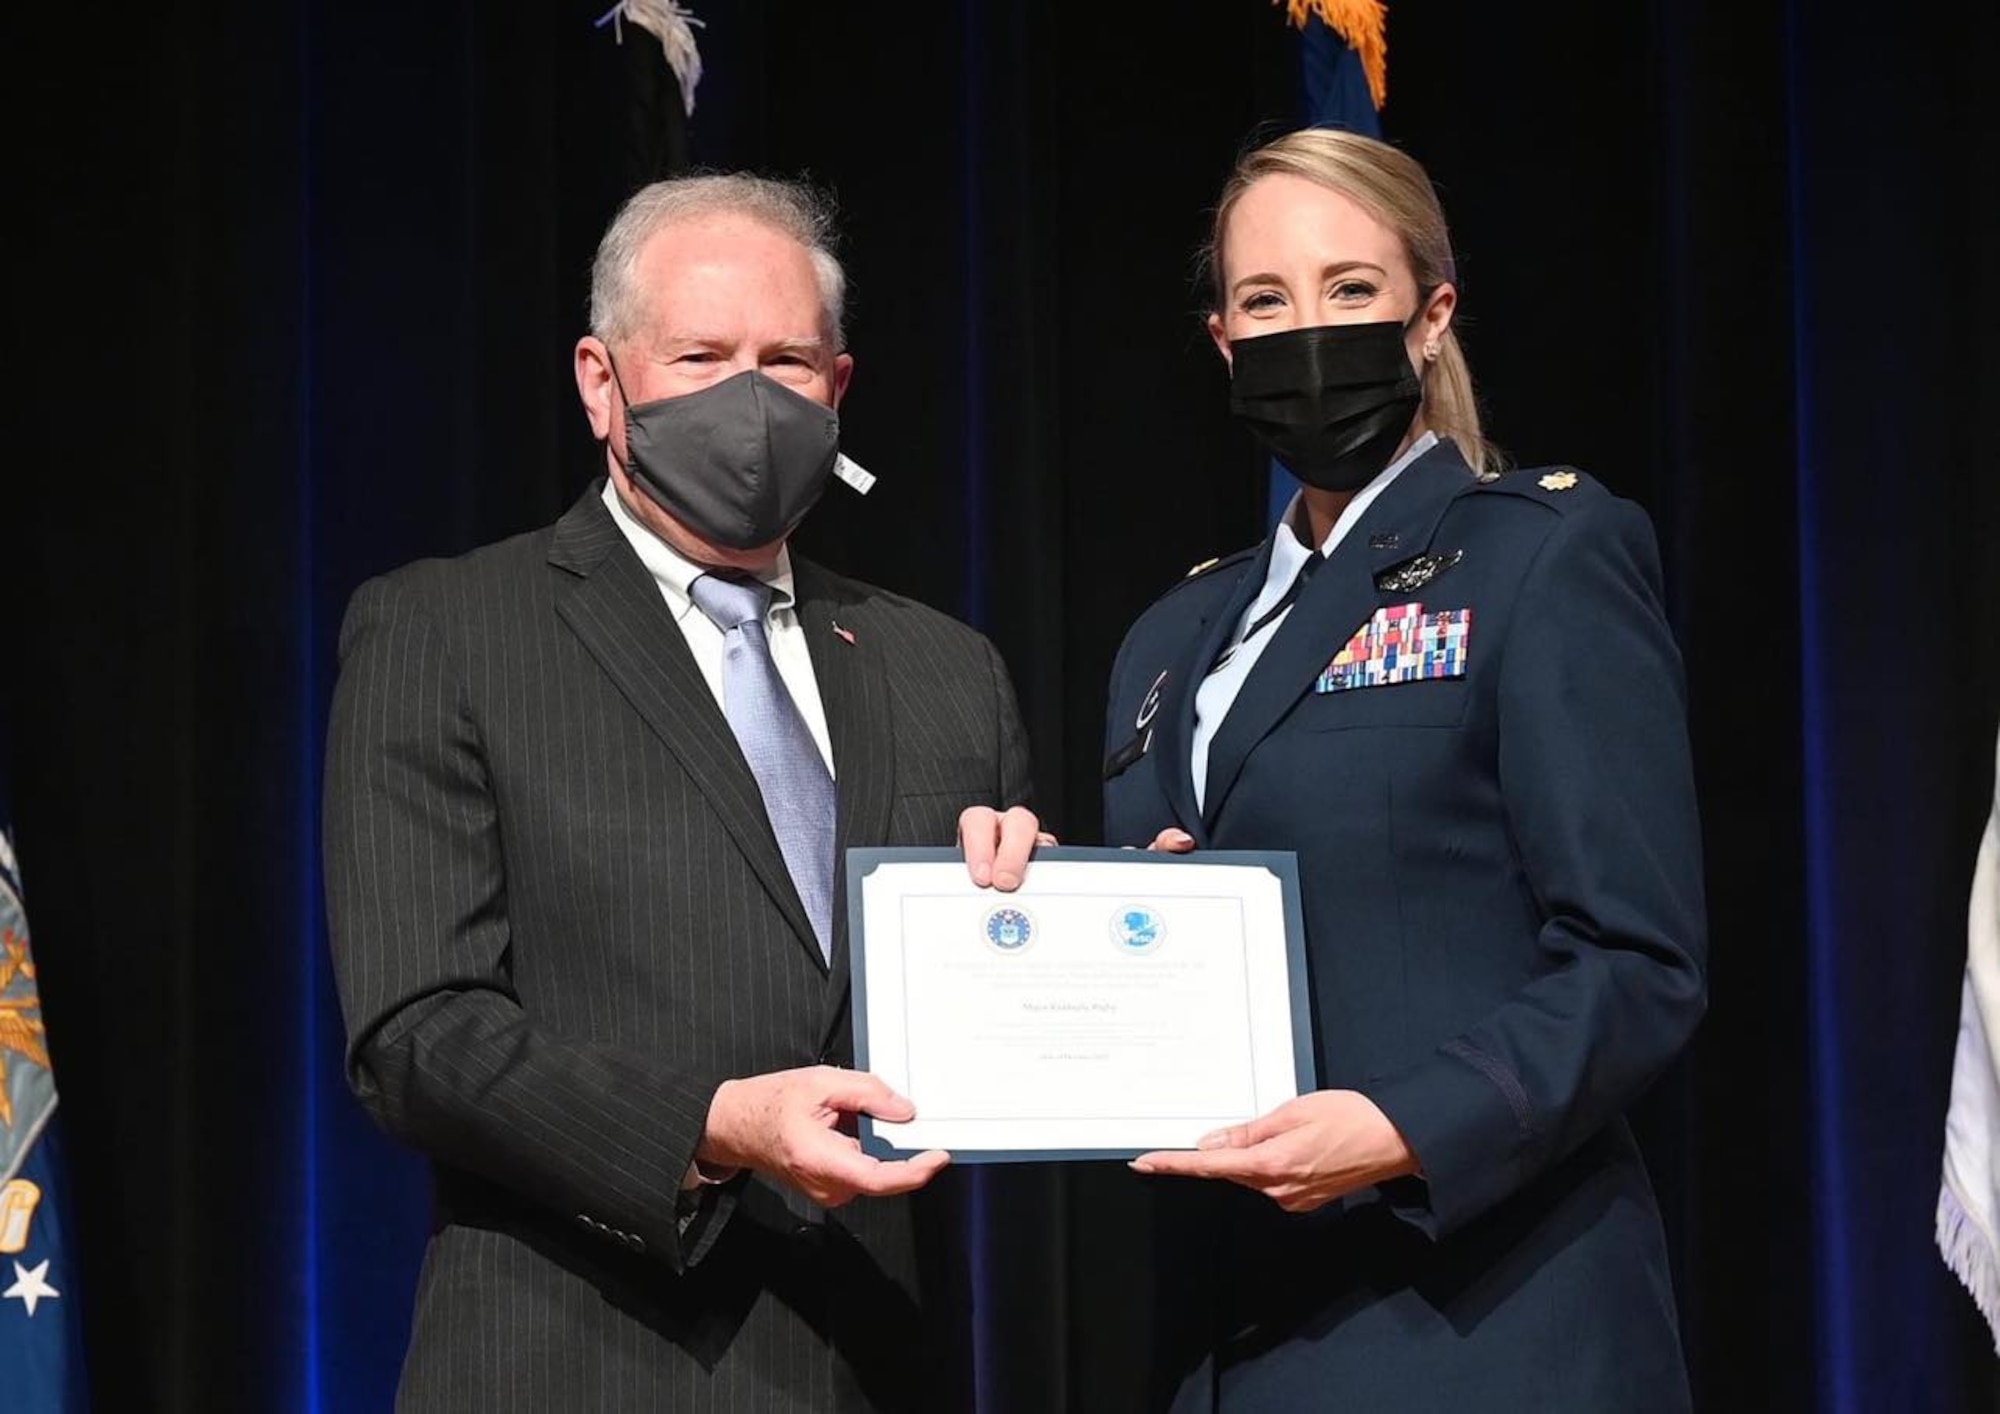 Secretary of the Air Force Frank Kendall, left, recognizes Maj Kim Rigby, deputy chief of staff of Air Force Global Strike Command, for her achievements as part of the Air Force Women’s Initiative Team at the Pentagon in Arlington, Virginia, October 2020. The WIT earned the Department of the Air Force Diversity and Inclusion Team Innovation Award for going above and beyond with efforts that advocate for diversity and inclusion in the Air Force.